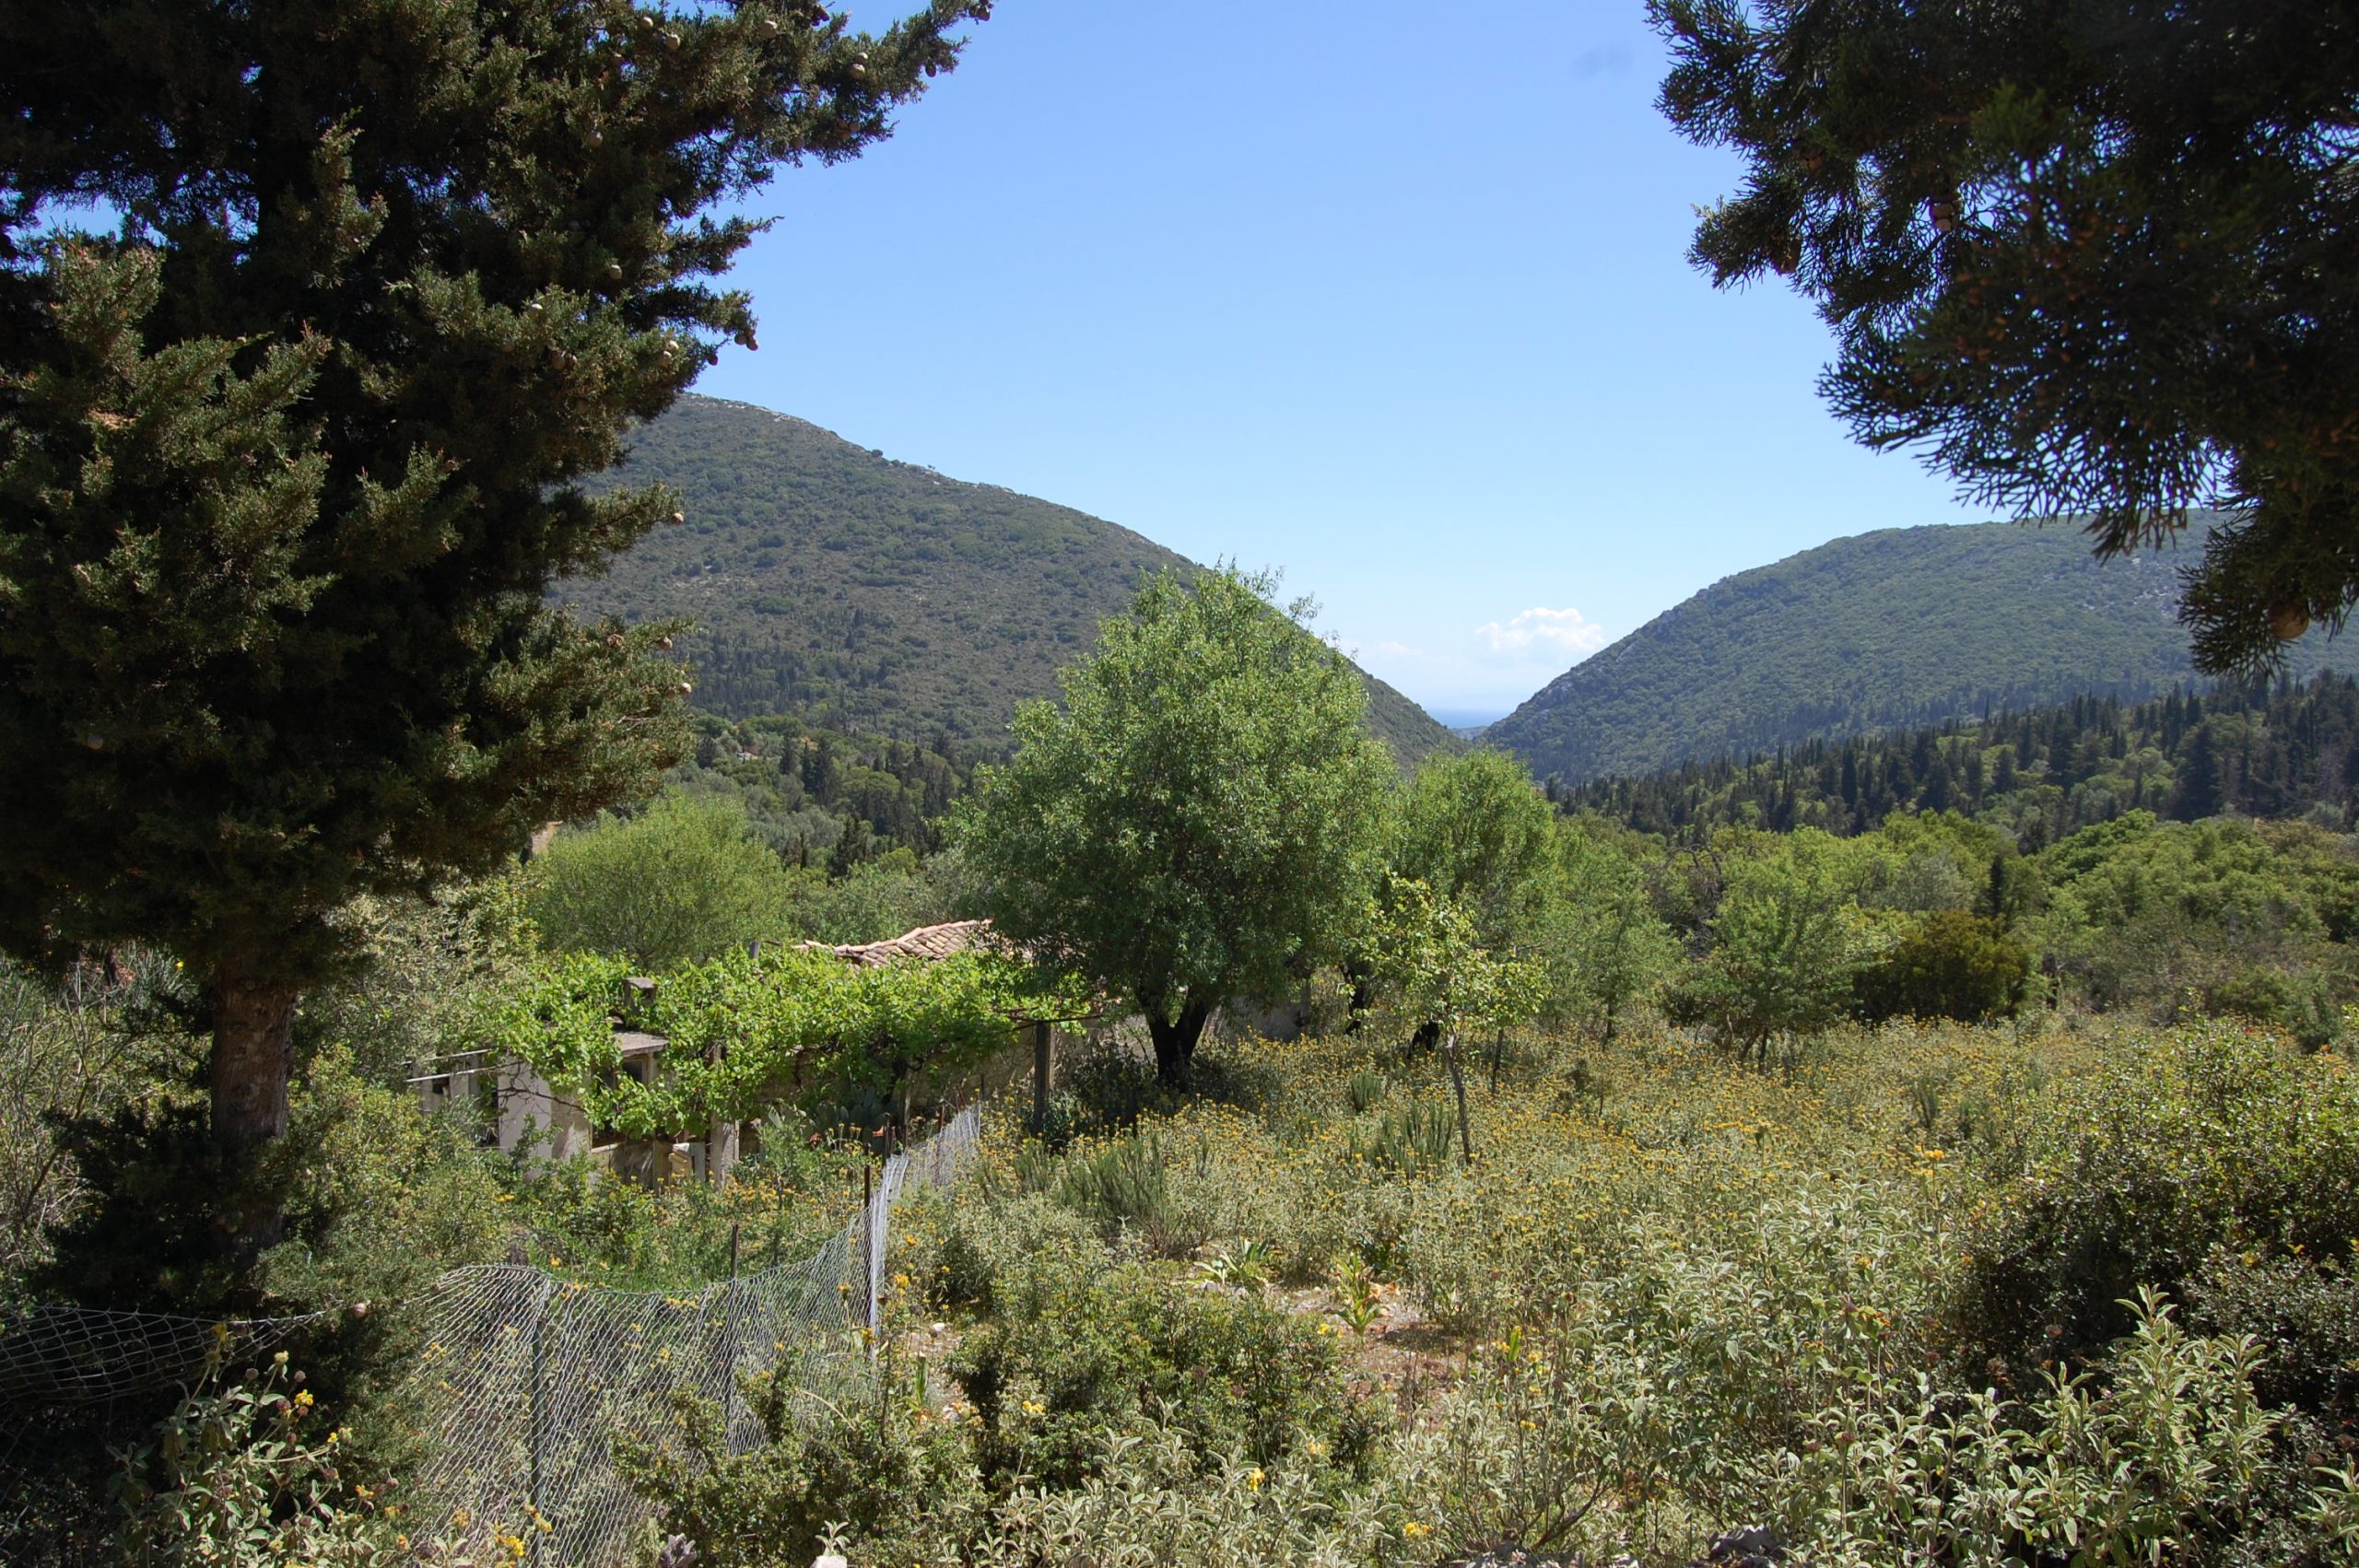 Landscape and view from house for sale in Ithaca Greece, Pilikata